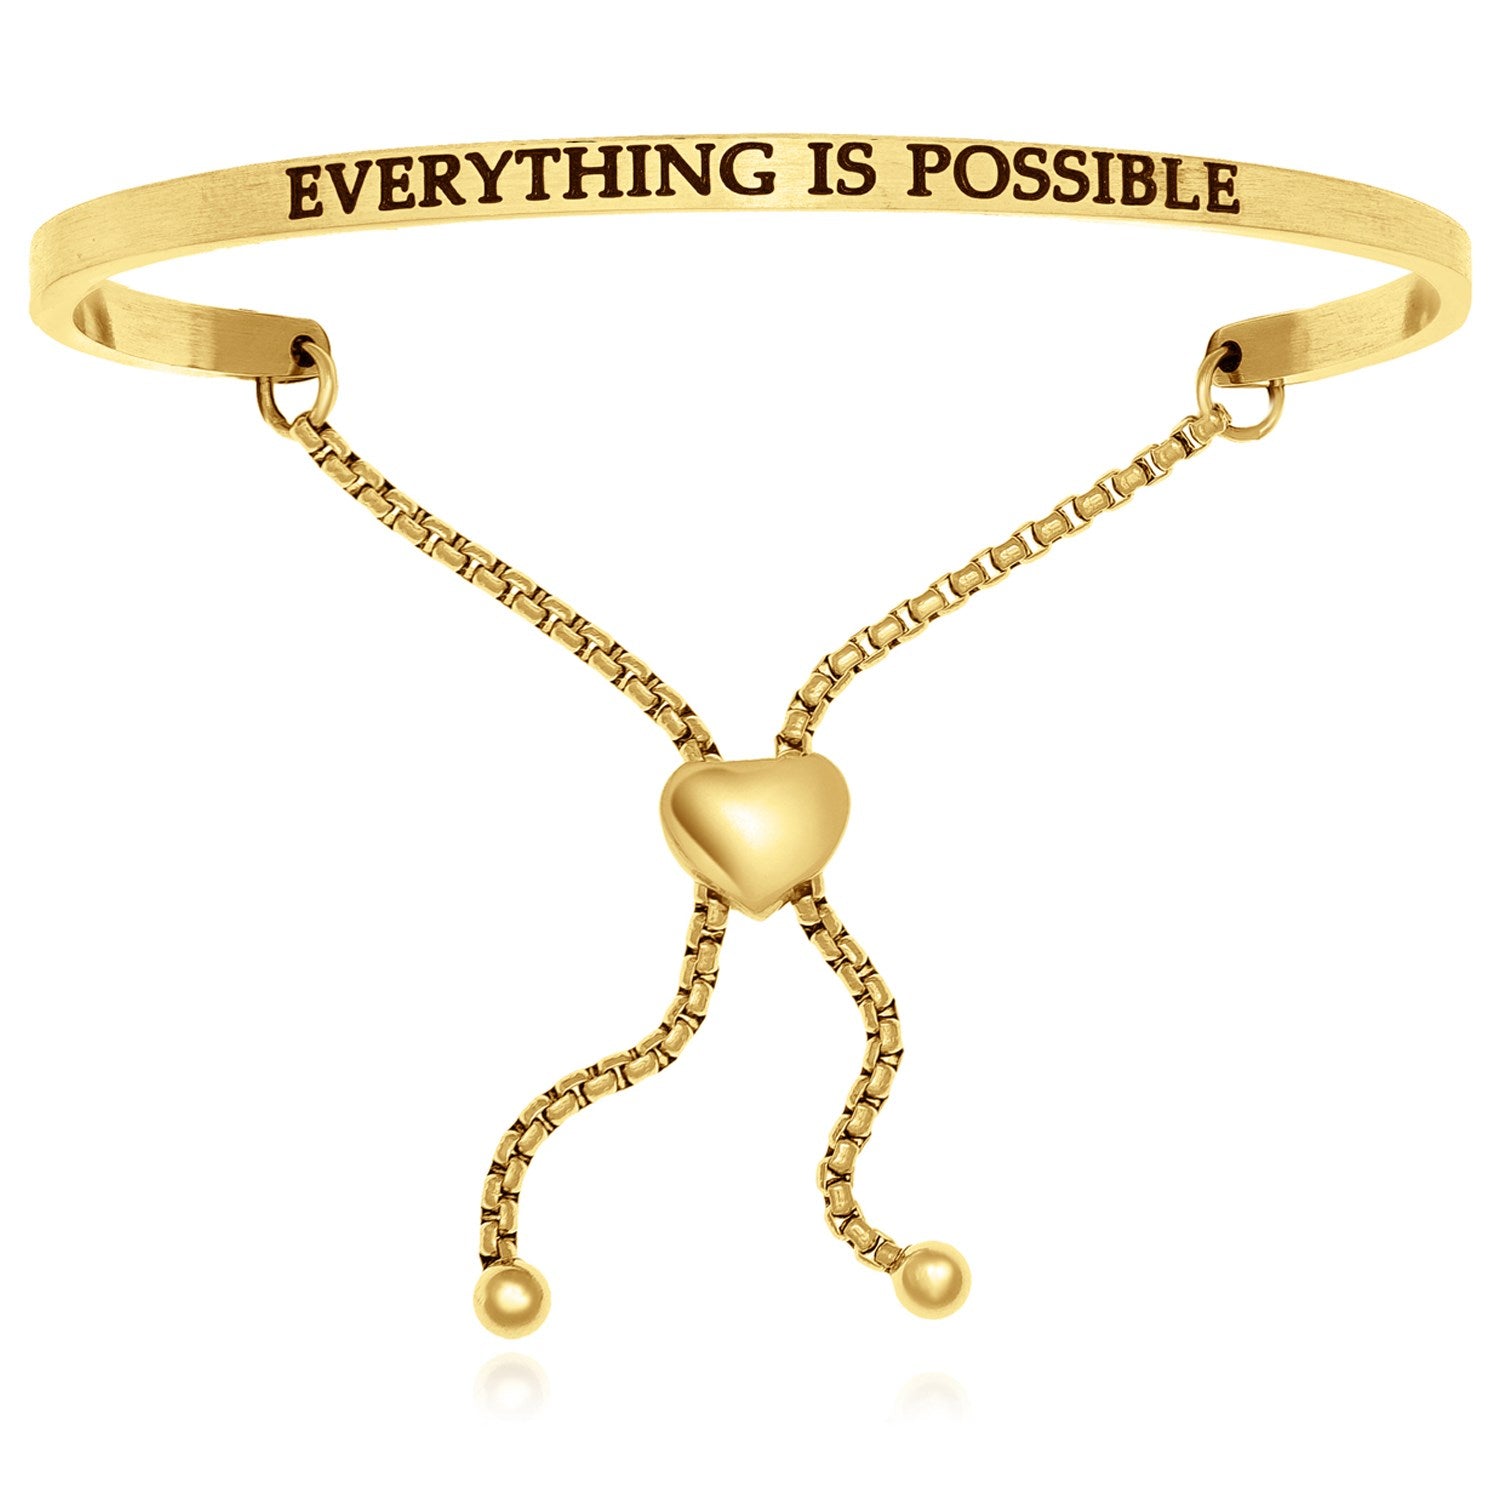 Yellow Stainless Steel Everything Is Possible Adjustable Bracelet